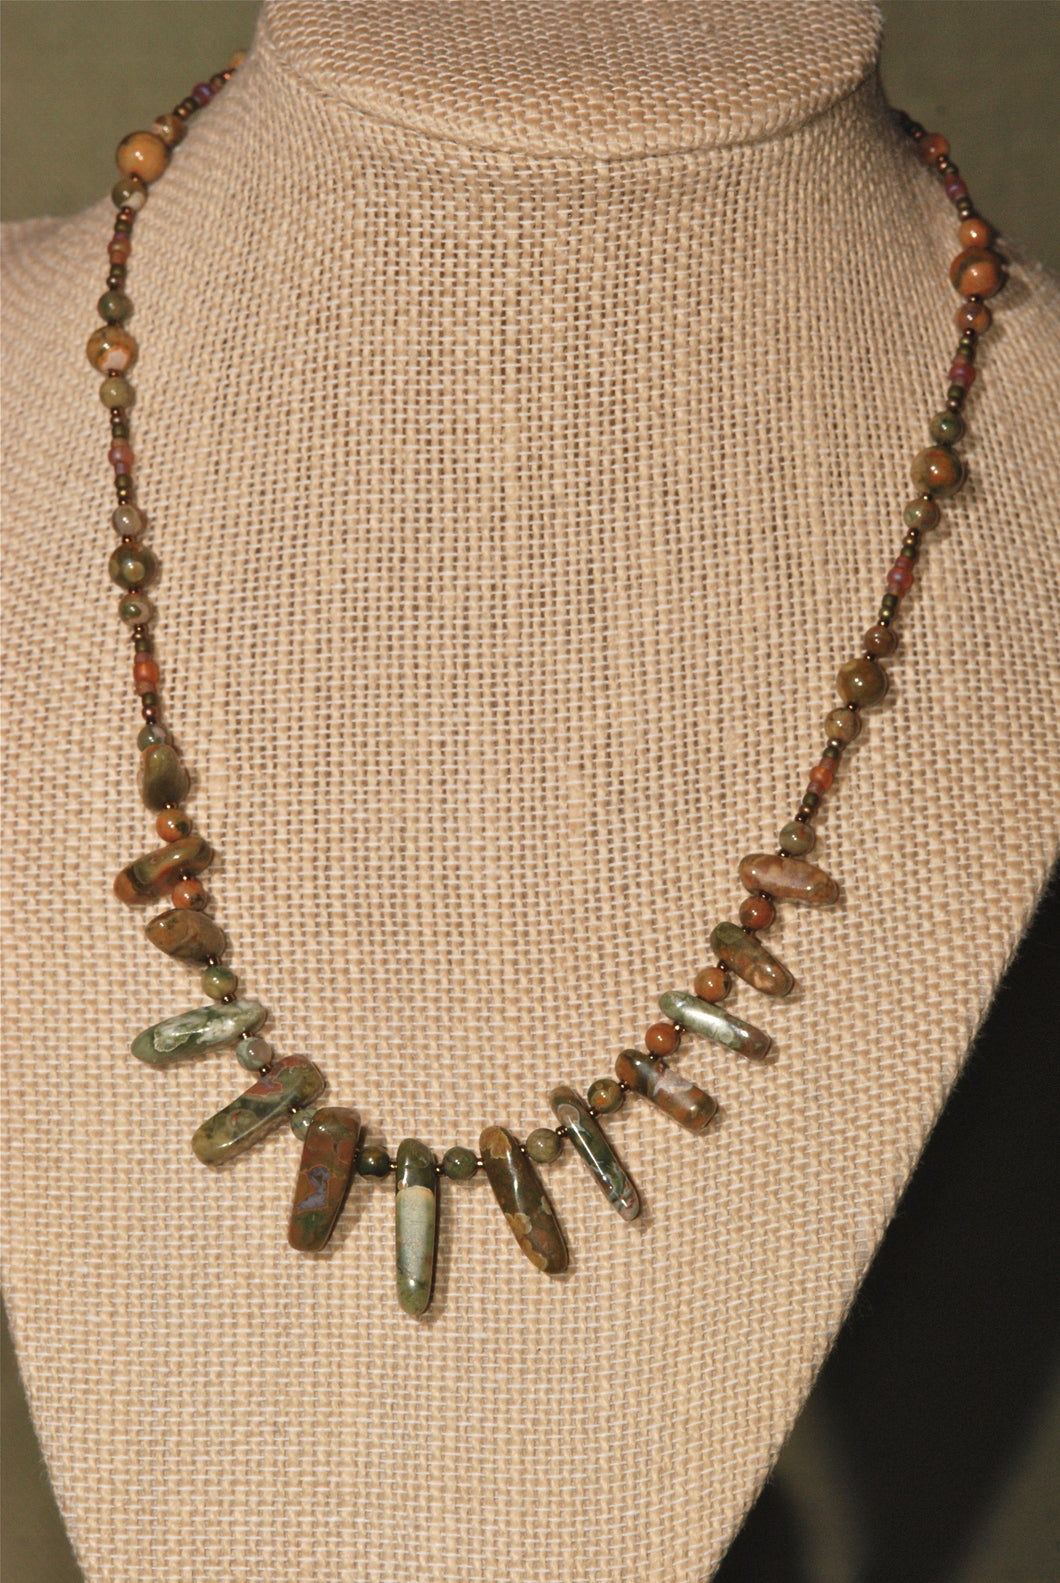 Rhyolite Necklace with drops - N6001